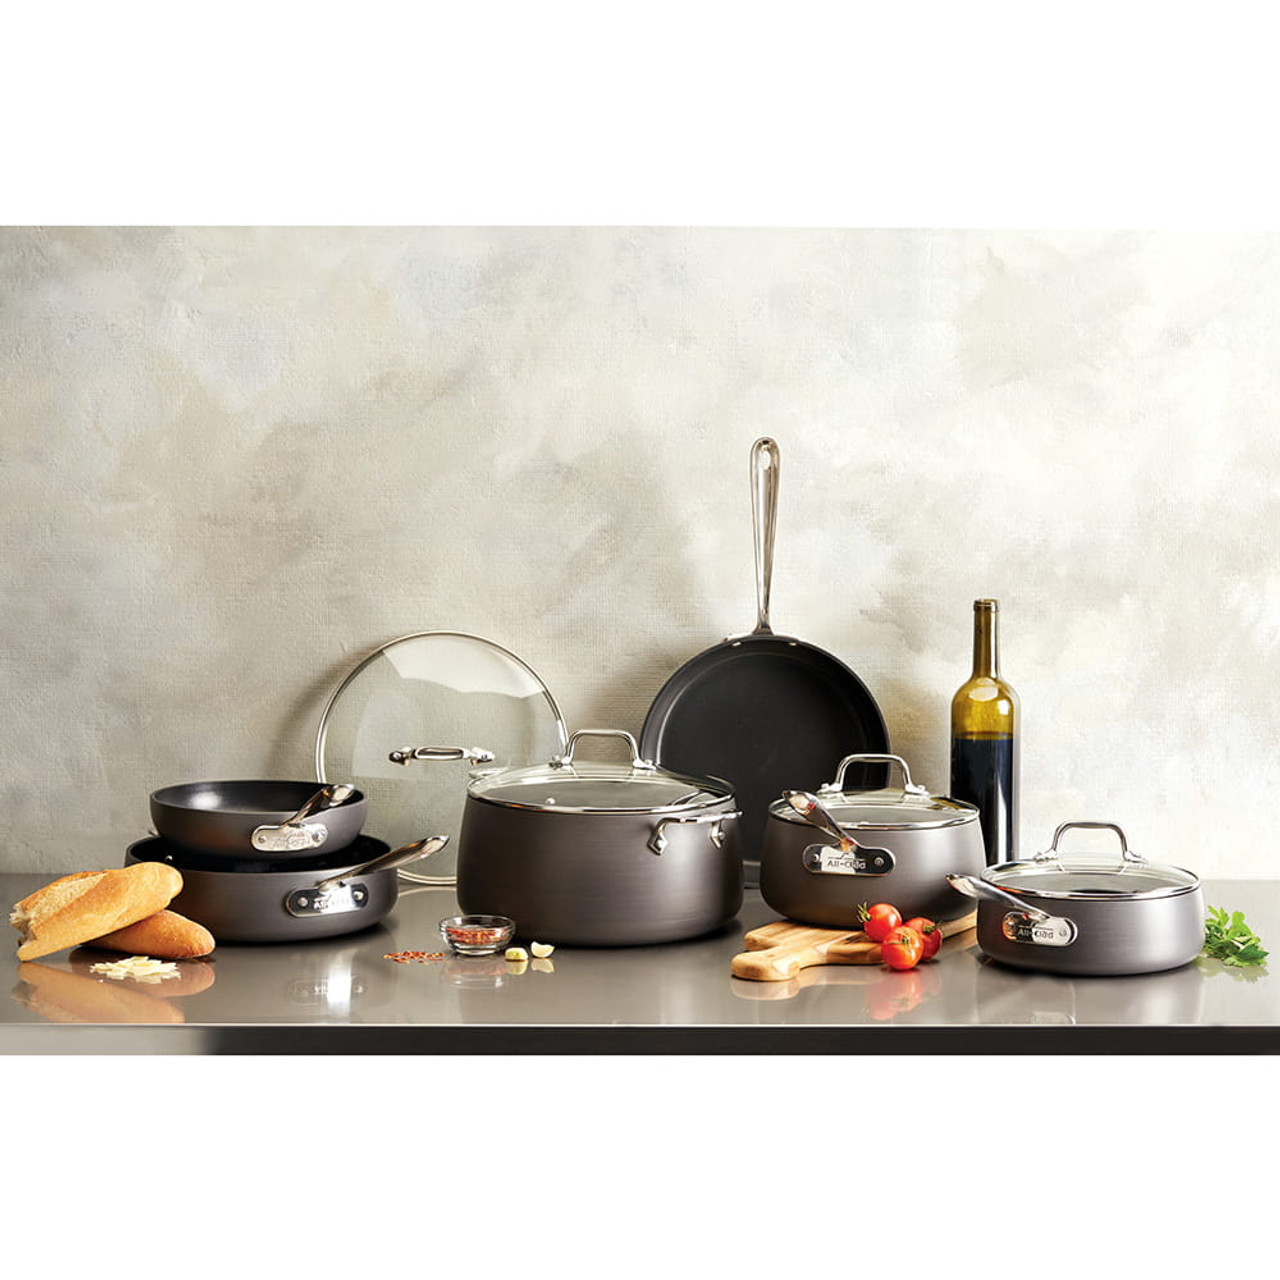 https://cdn11.bigcommerce.com/s-hccytny0od/images/stencil/1280x1280/products/518/8404/all-clad-ha1-10-piece-cookware-set-1__32595.1595949308.jpg?c=2?imbypass=on